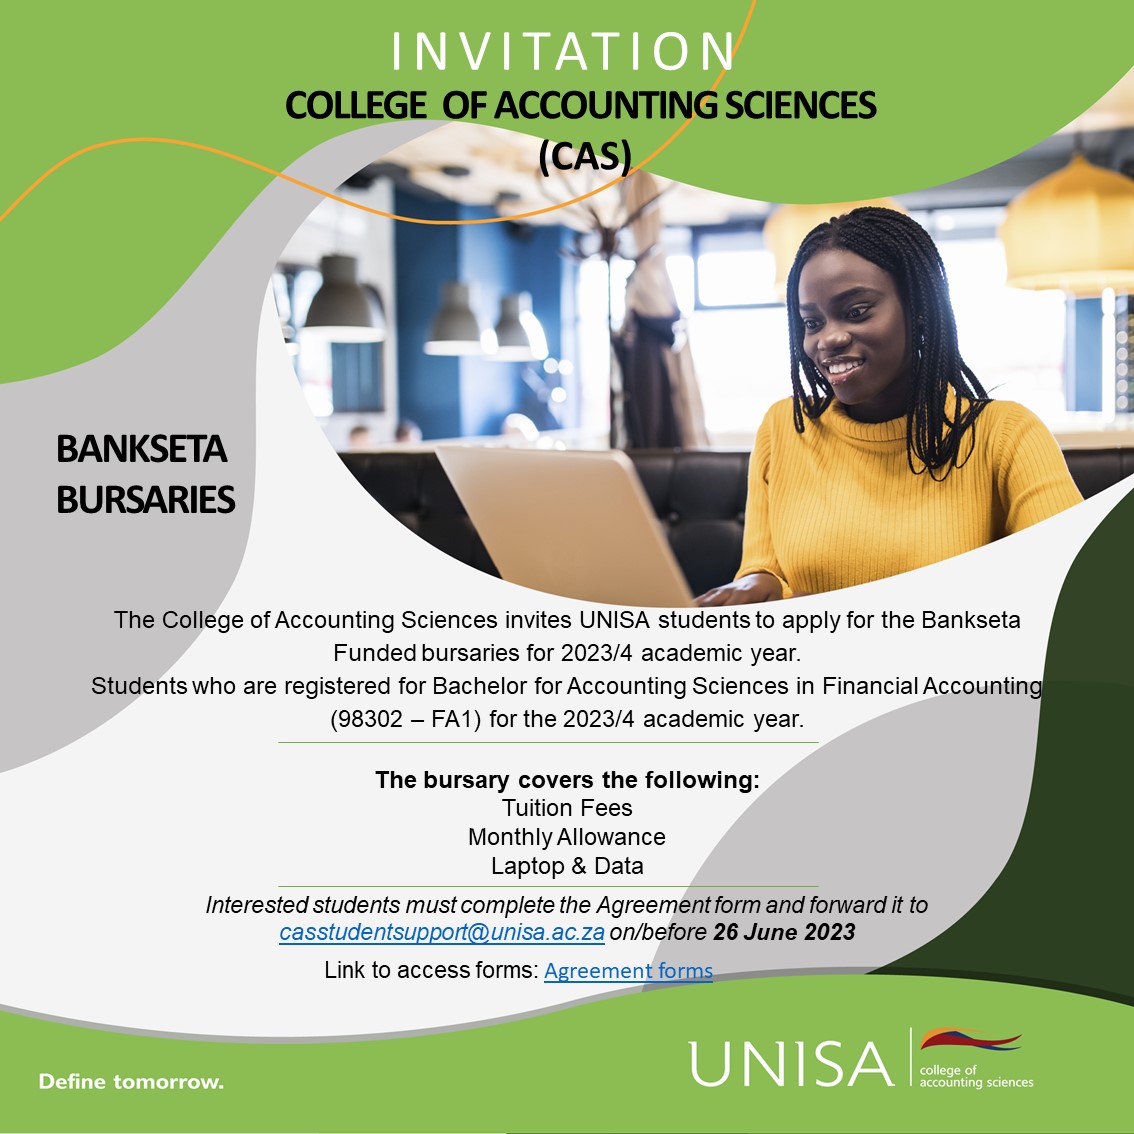 The College of Accounting Sciences invites UNISA students to apply for the Bankseta Funded bursaries for 2023/4 academic year.

This bursary is applicable to students who are registered for Bachelor for Accounting Sciences in Financial Accounting (98302 – FA1) 

#unisa150